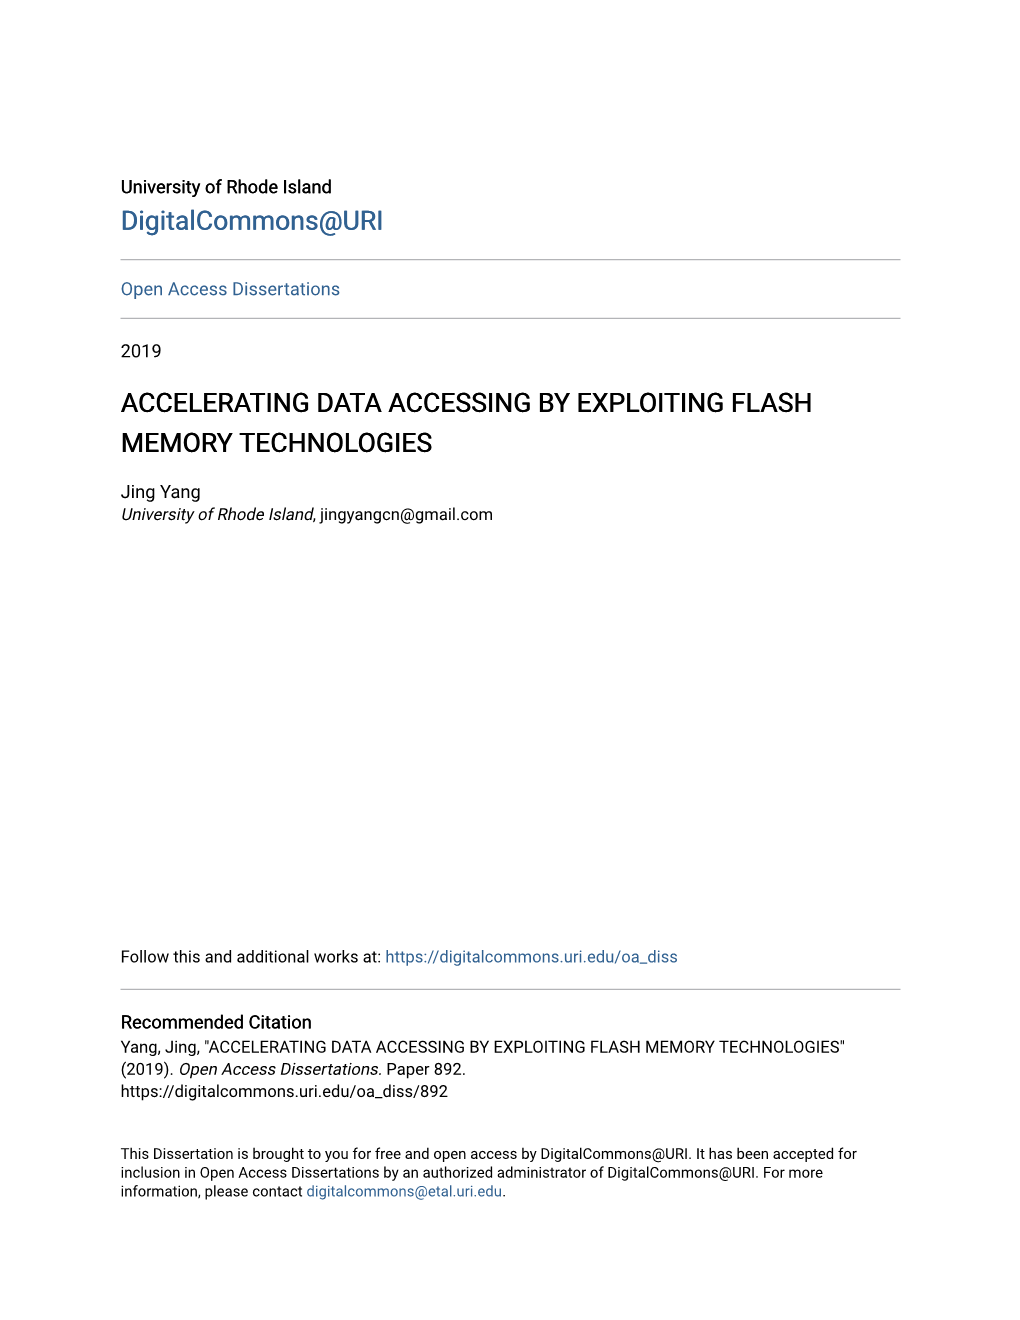 Accelerating Data Accessing by Exploiting Flash Memory Technologies